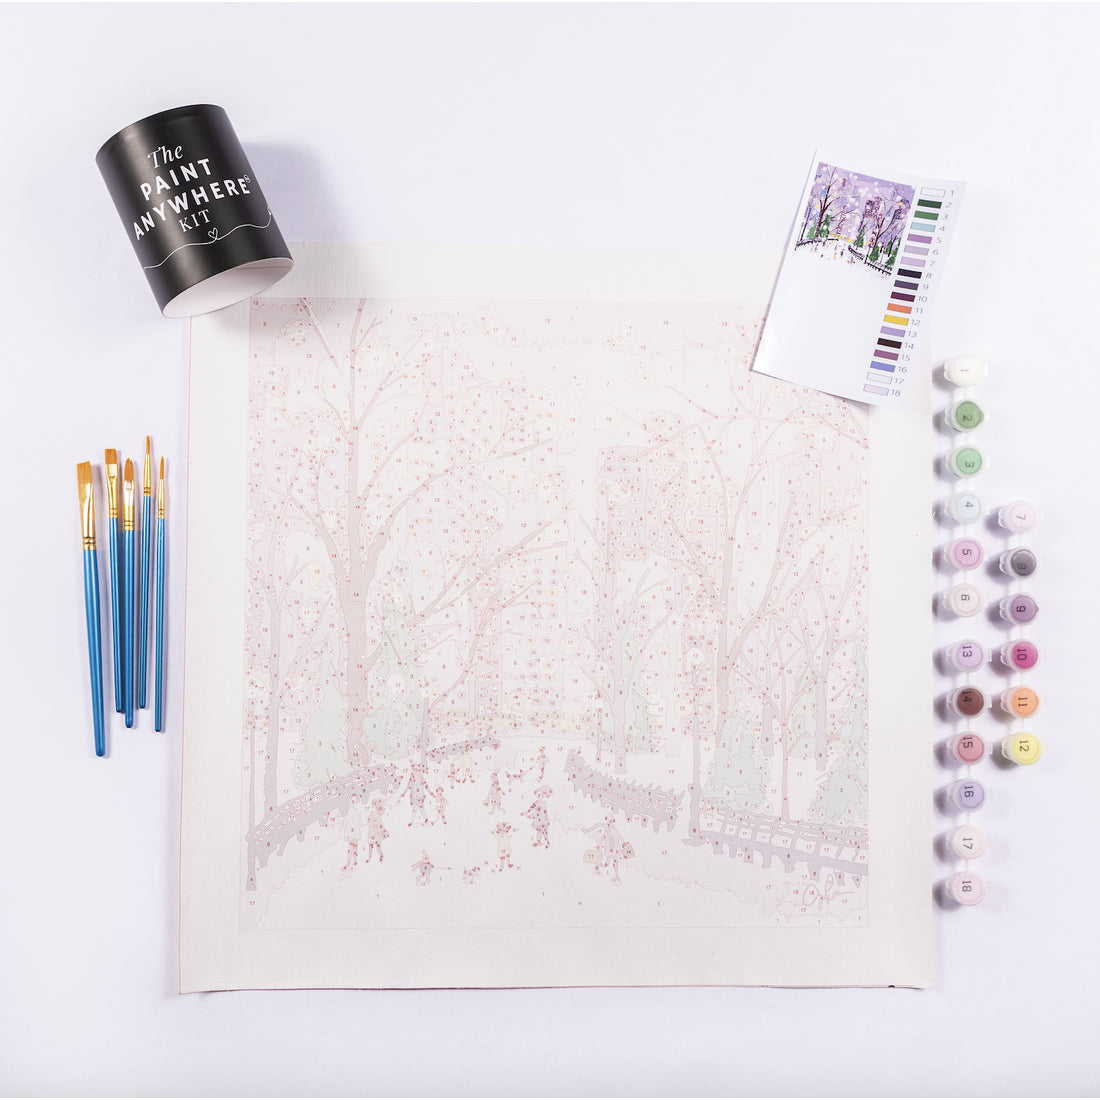 Paint by Number Kit - Snowy Night